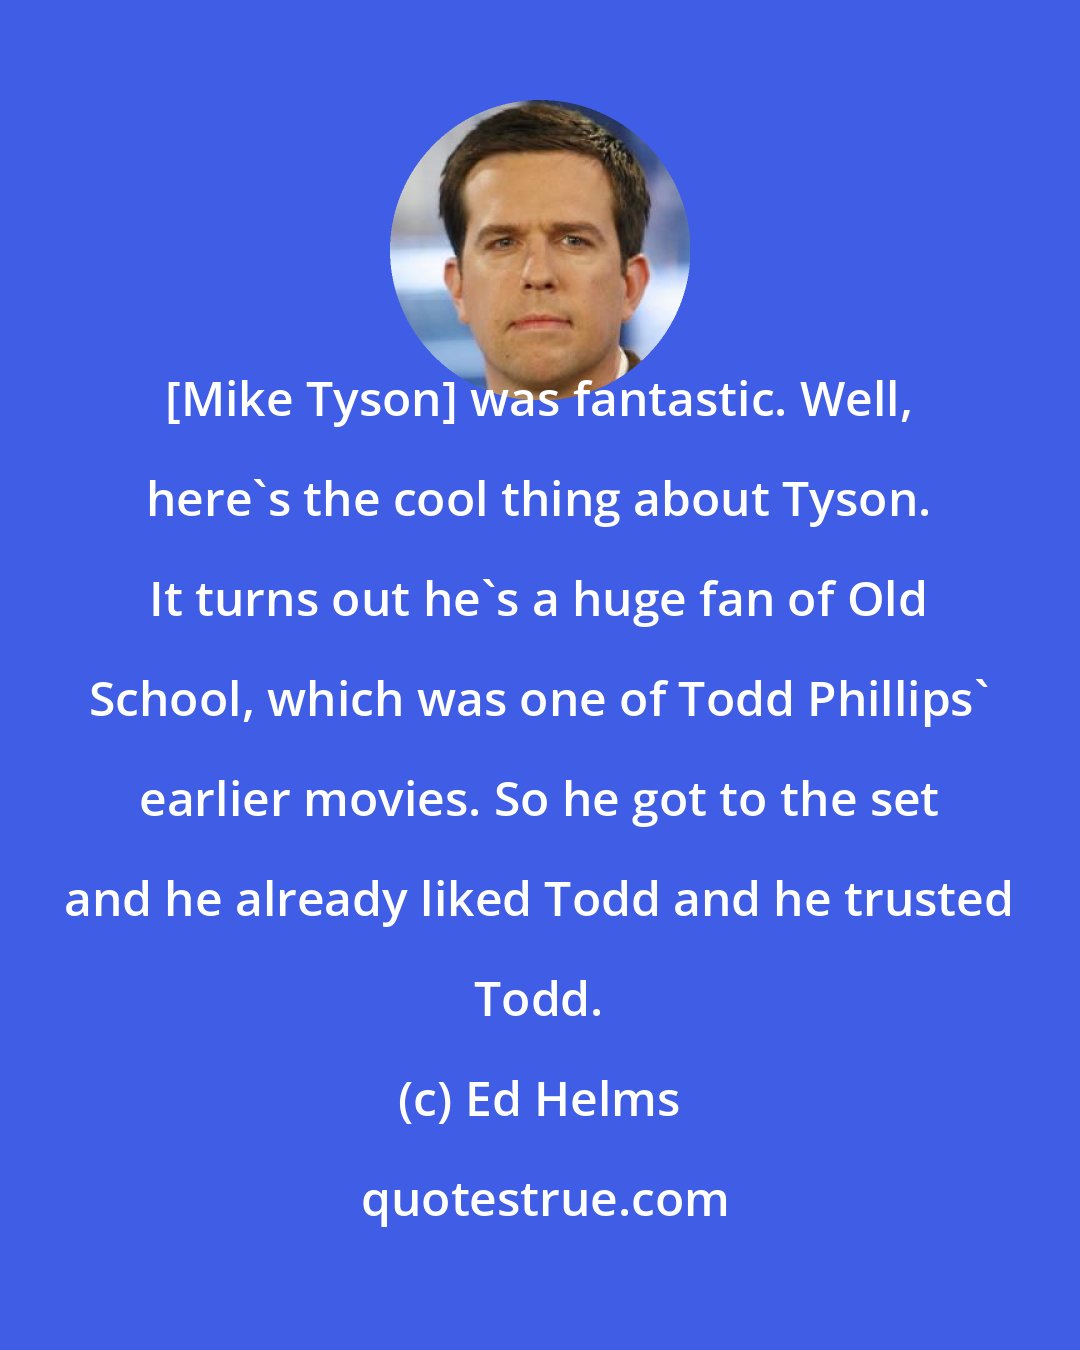 Ed Helms: [Mike Tyson] was fantastic. Well, here's the cool thing about Tyson. It turns out he's a huge fan of Old School, which was one of Todd Phillips' earlier movies. So he got to the set and he already liked Todd and he trusted Todd.